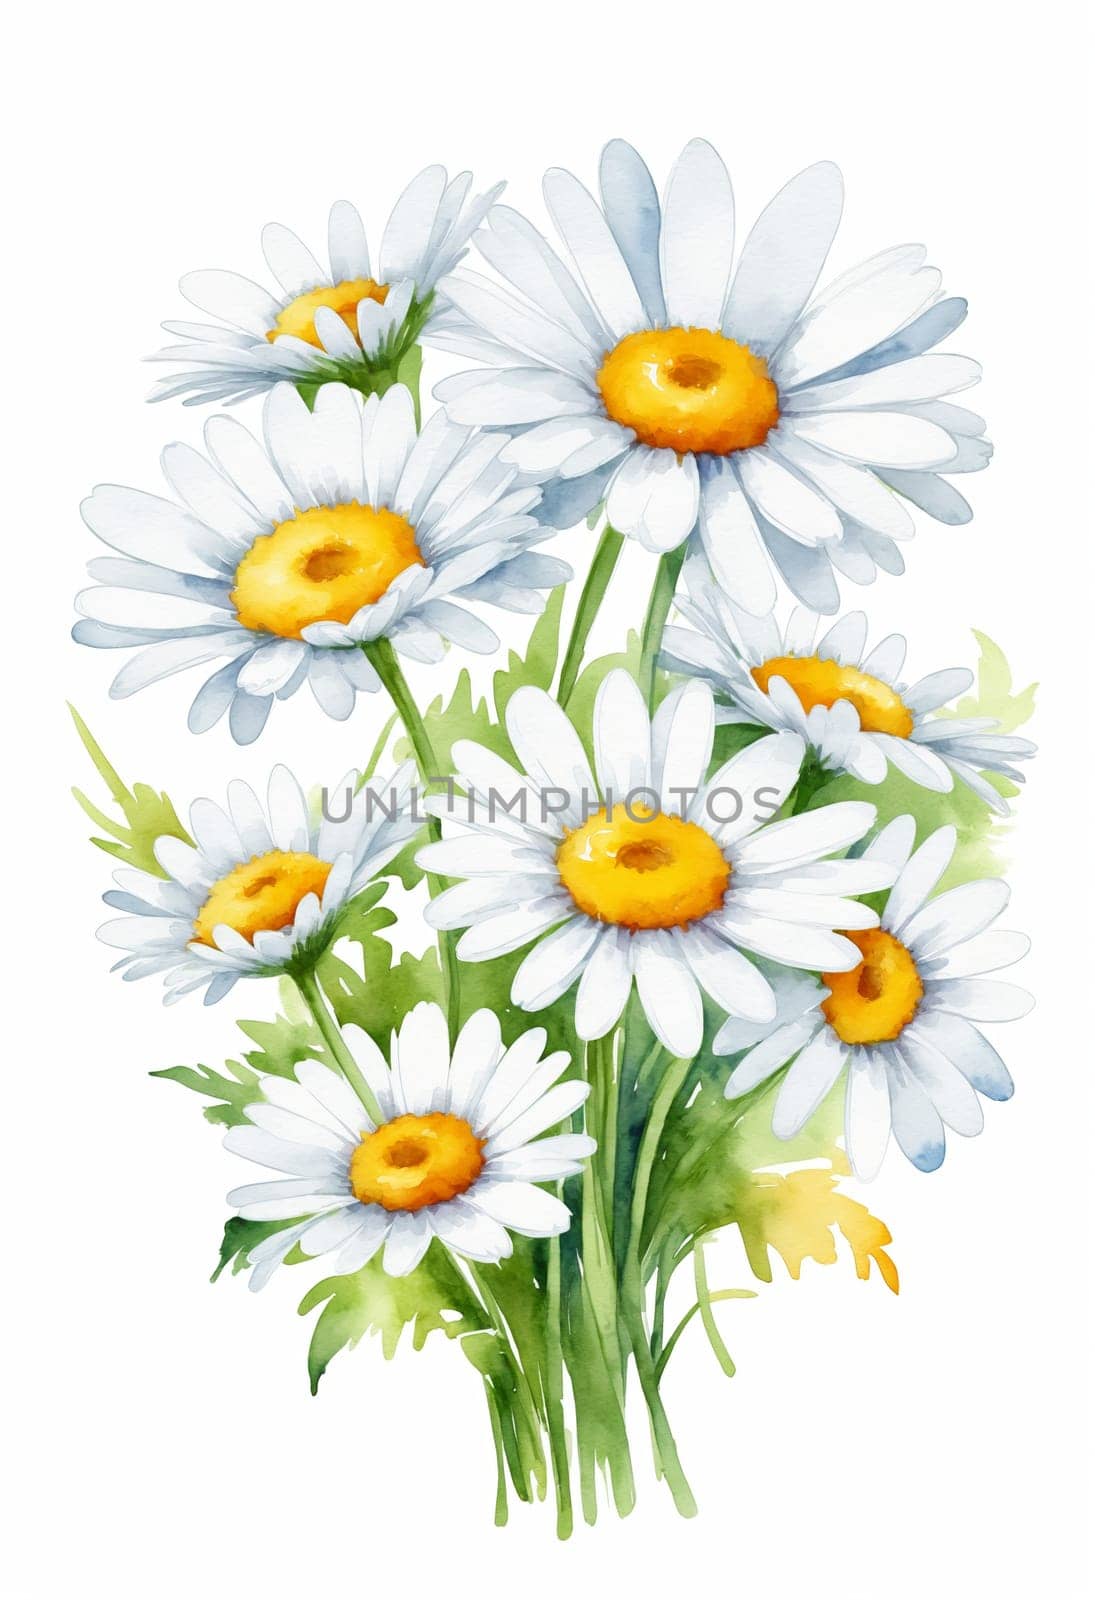 Beautiful image with watercolor daisies on white background by Andre1ns